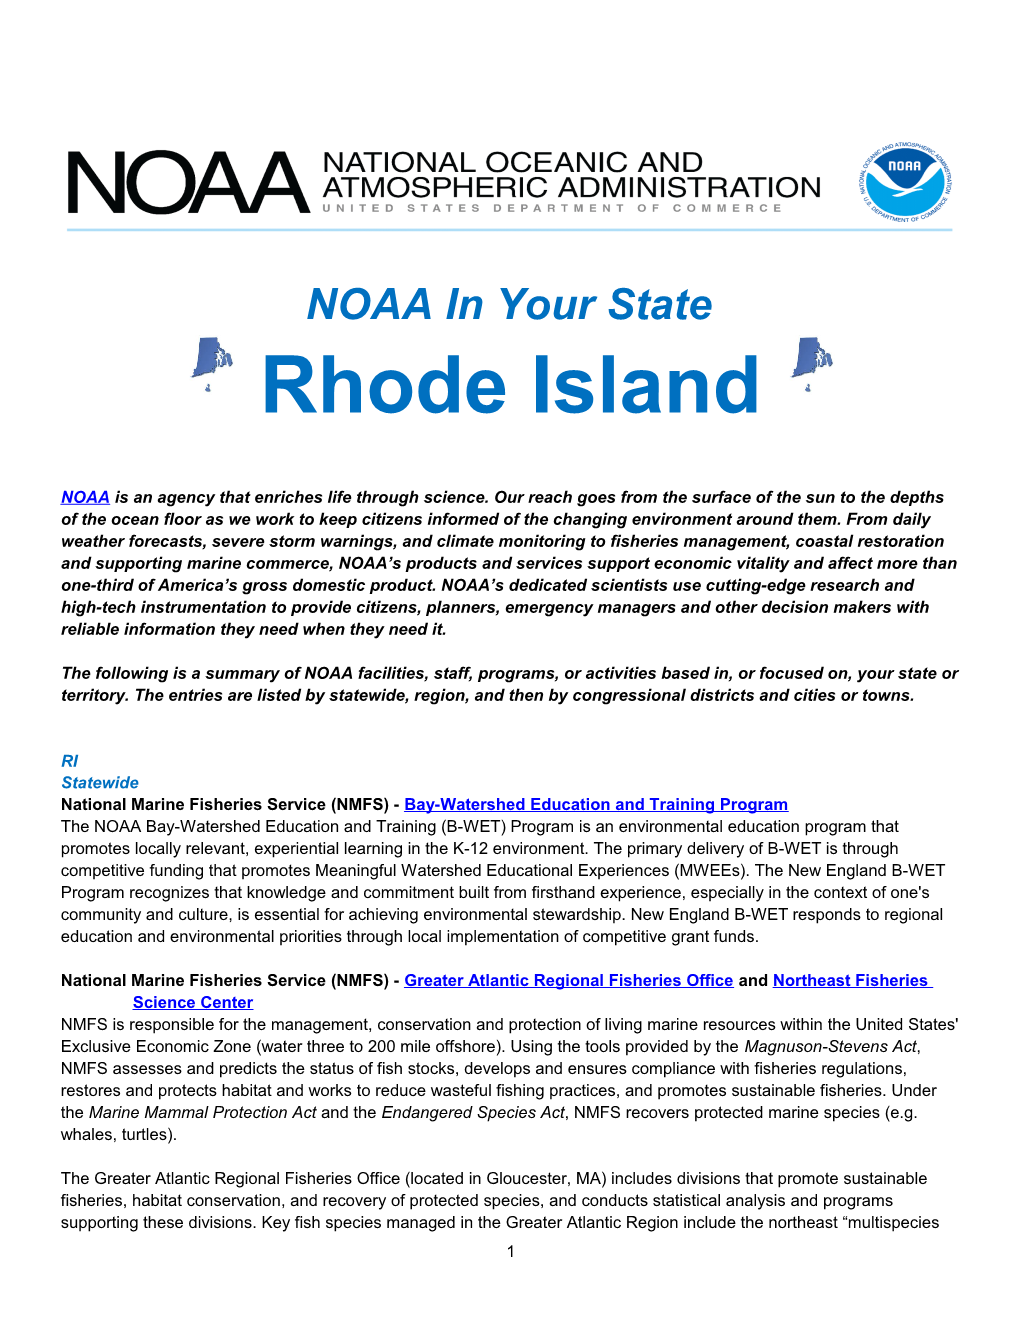 NOAA in Your State - Rhode Island